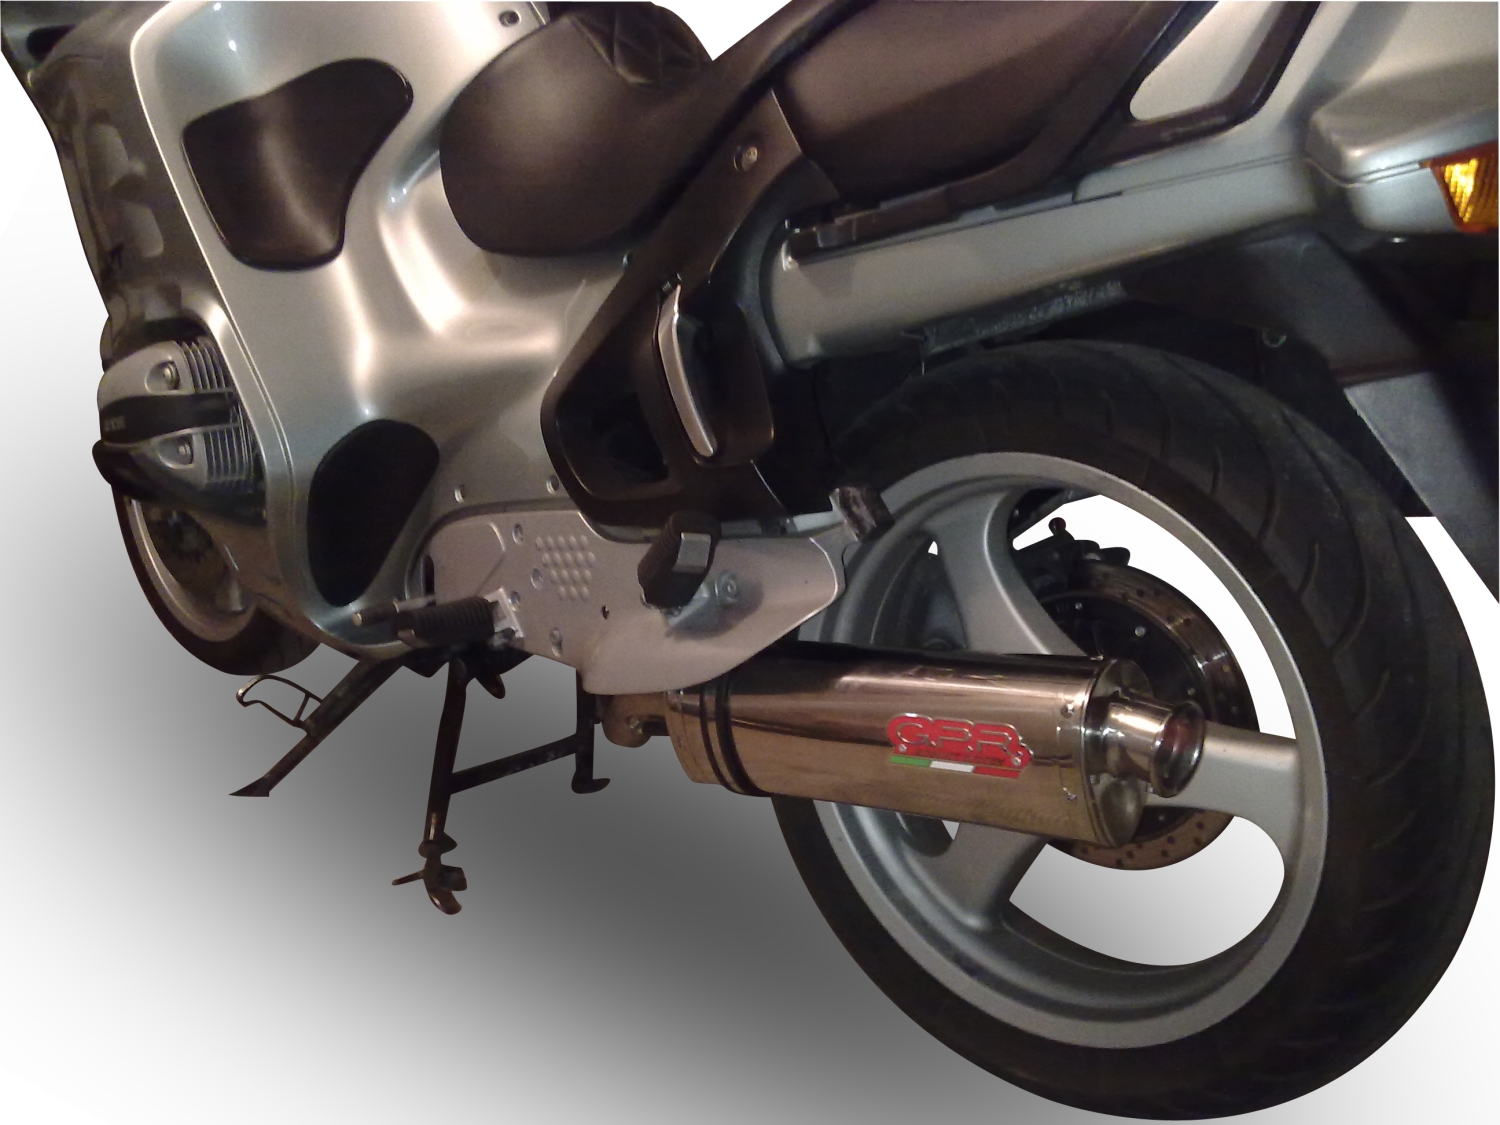 Exhaust system compatible with Bmw R 850 RT 1994-2001, Trioval, Homologated legal slip-on exhaust including removable db killer and link pipe 